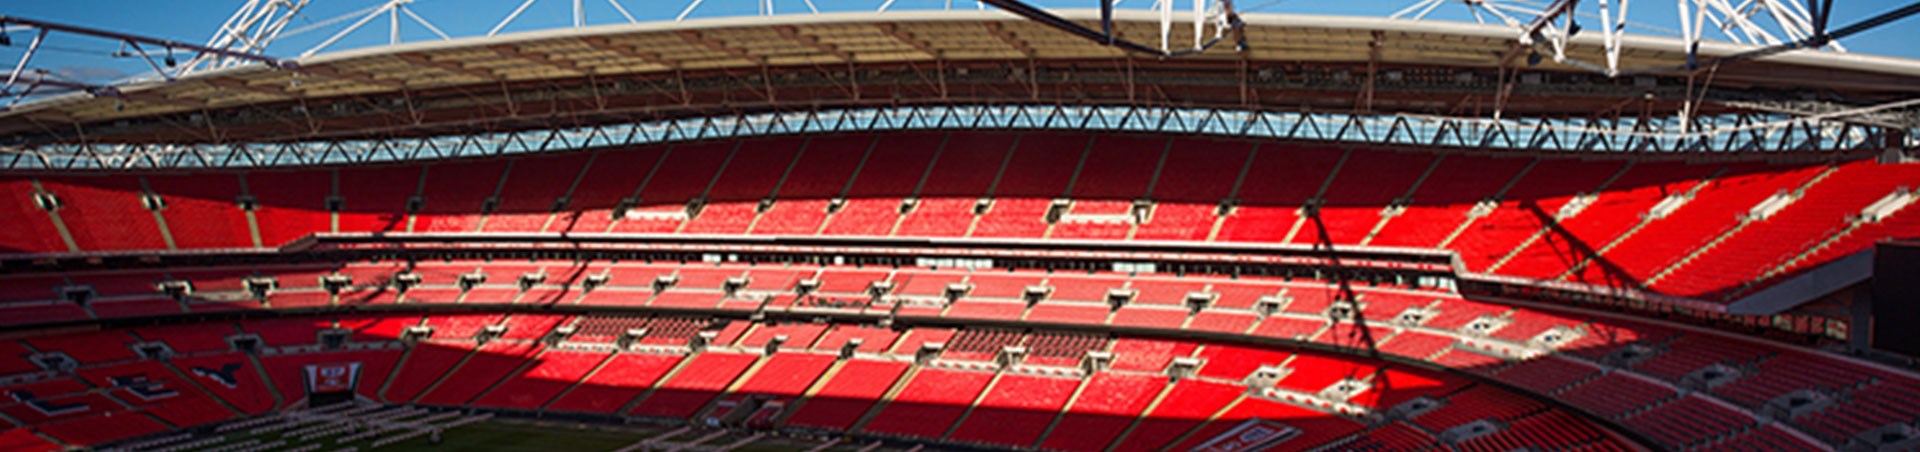 Travel to Wembley Stadium, London by coach from across the UK with National Express